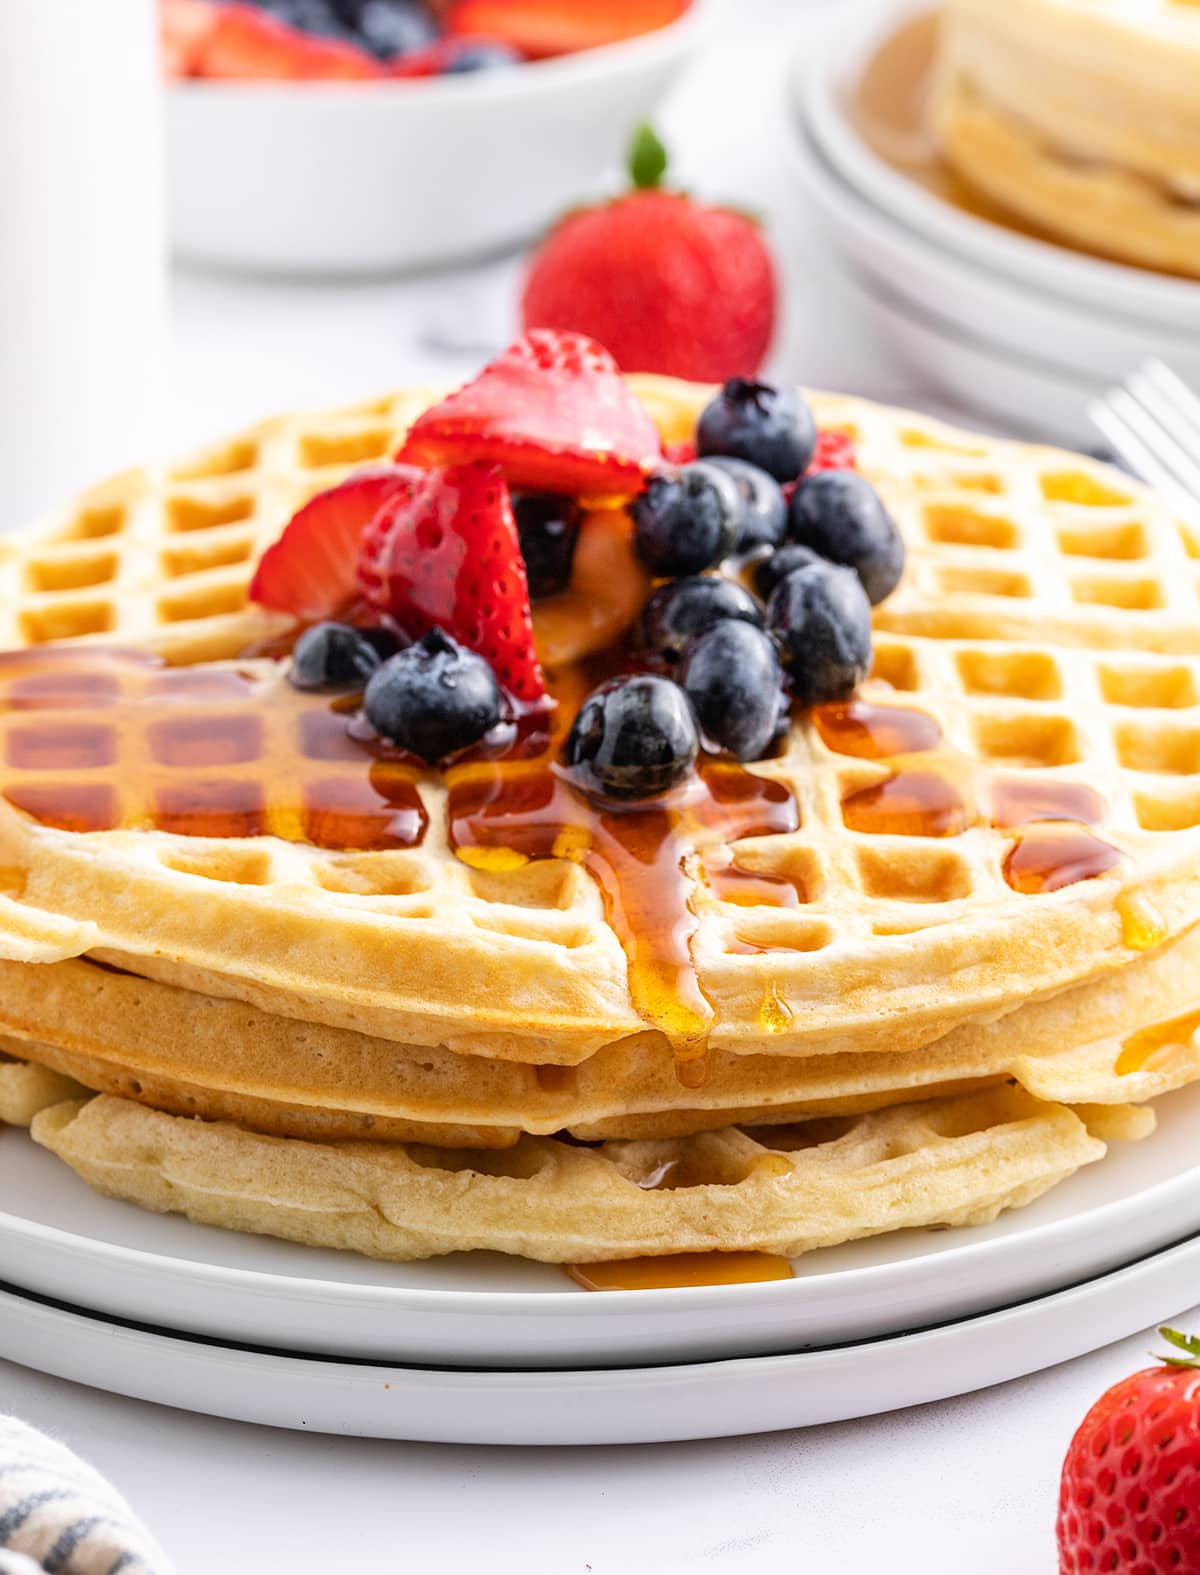 A stack of waffles on a plate topped with strawberries, blueberries, and syrup.